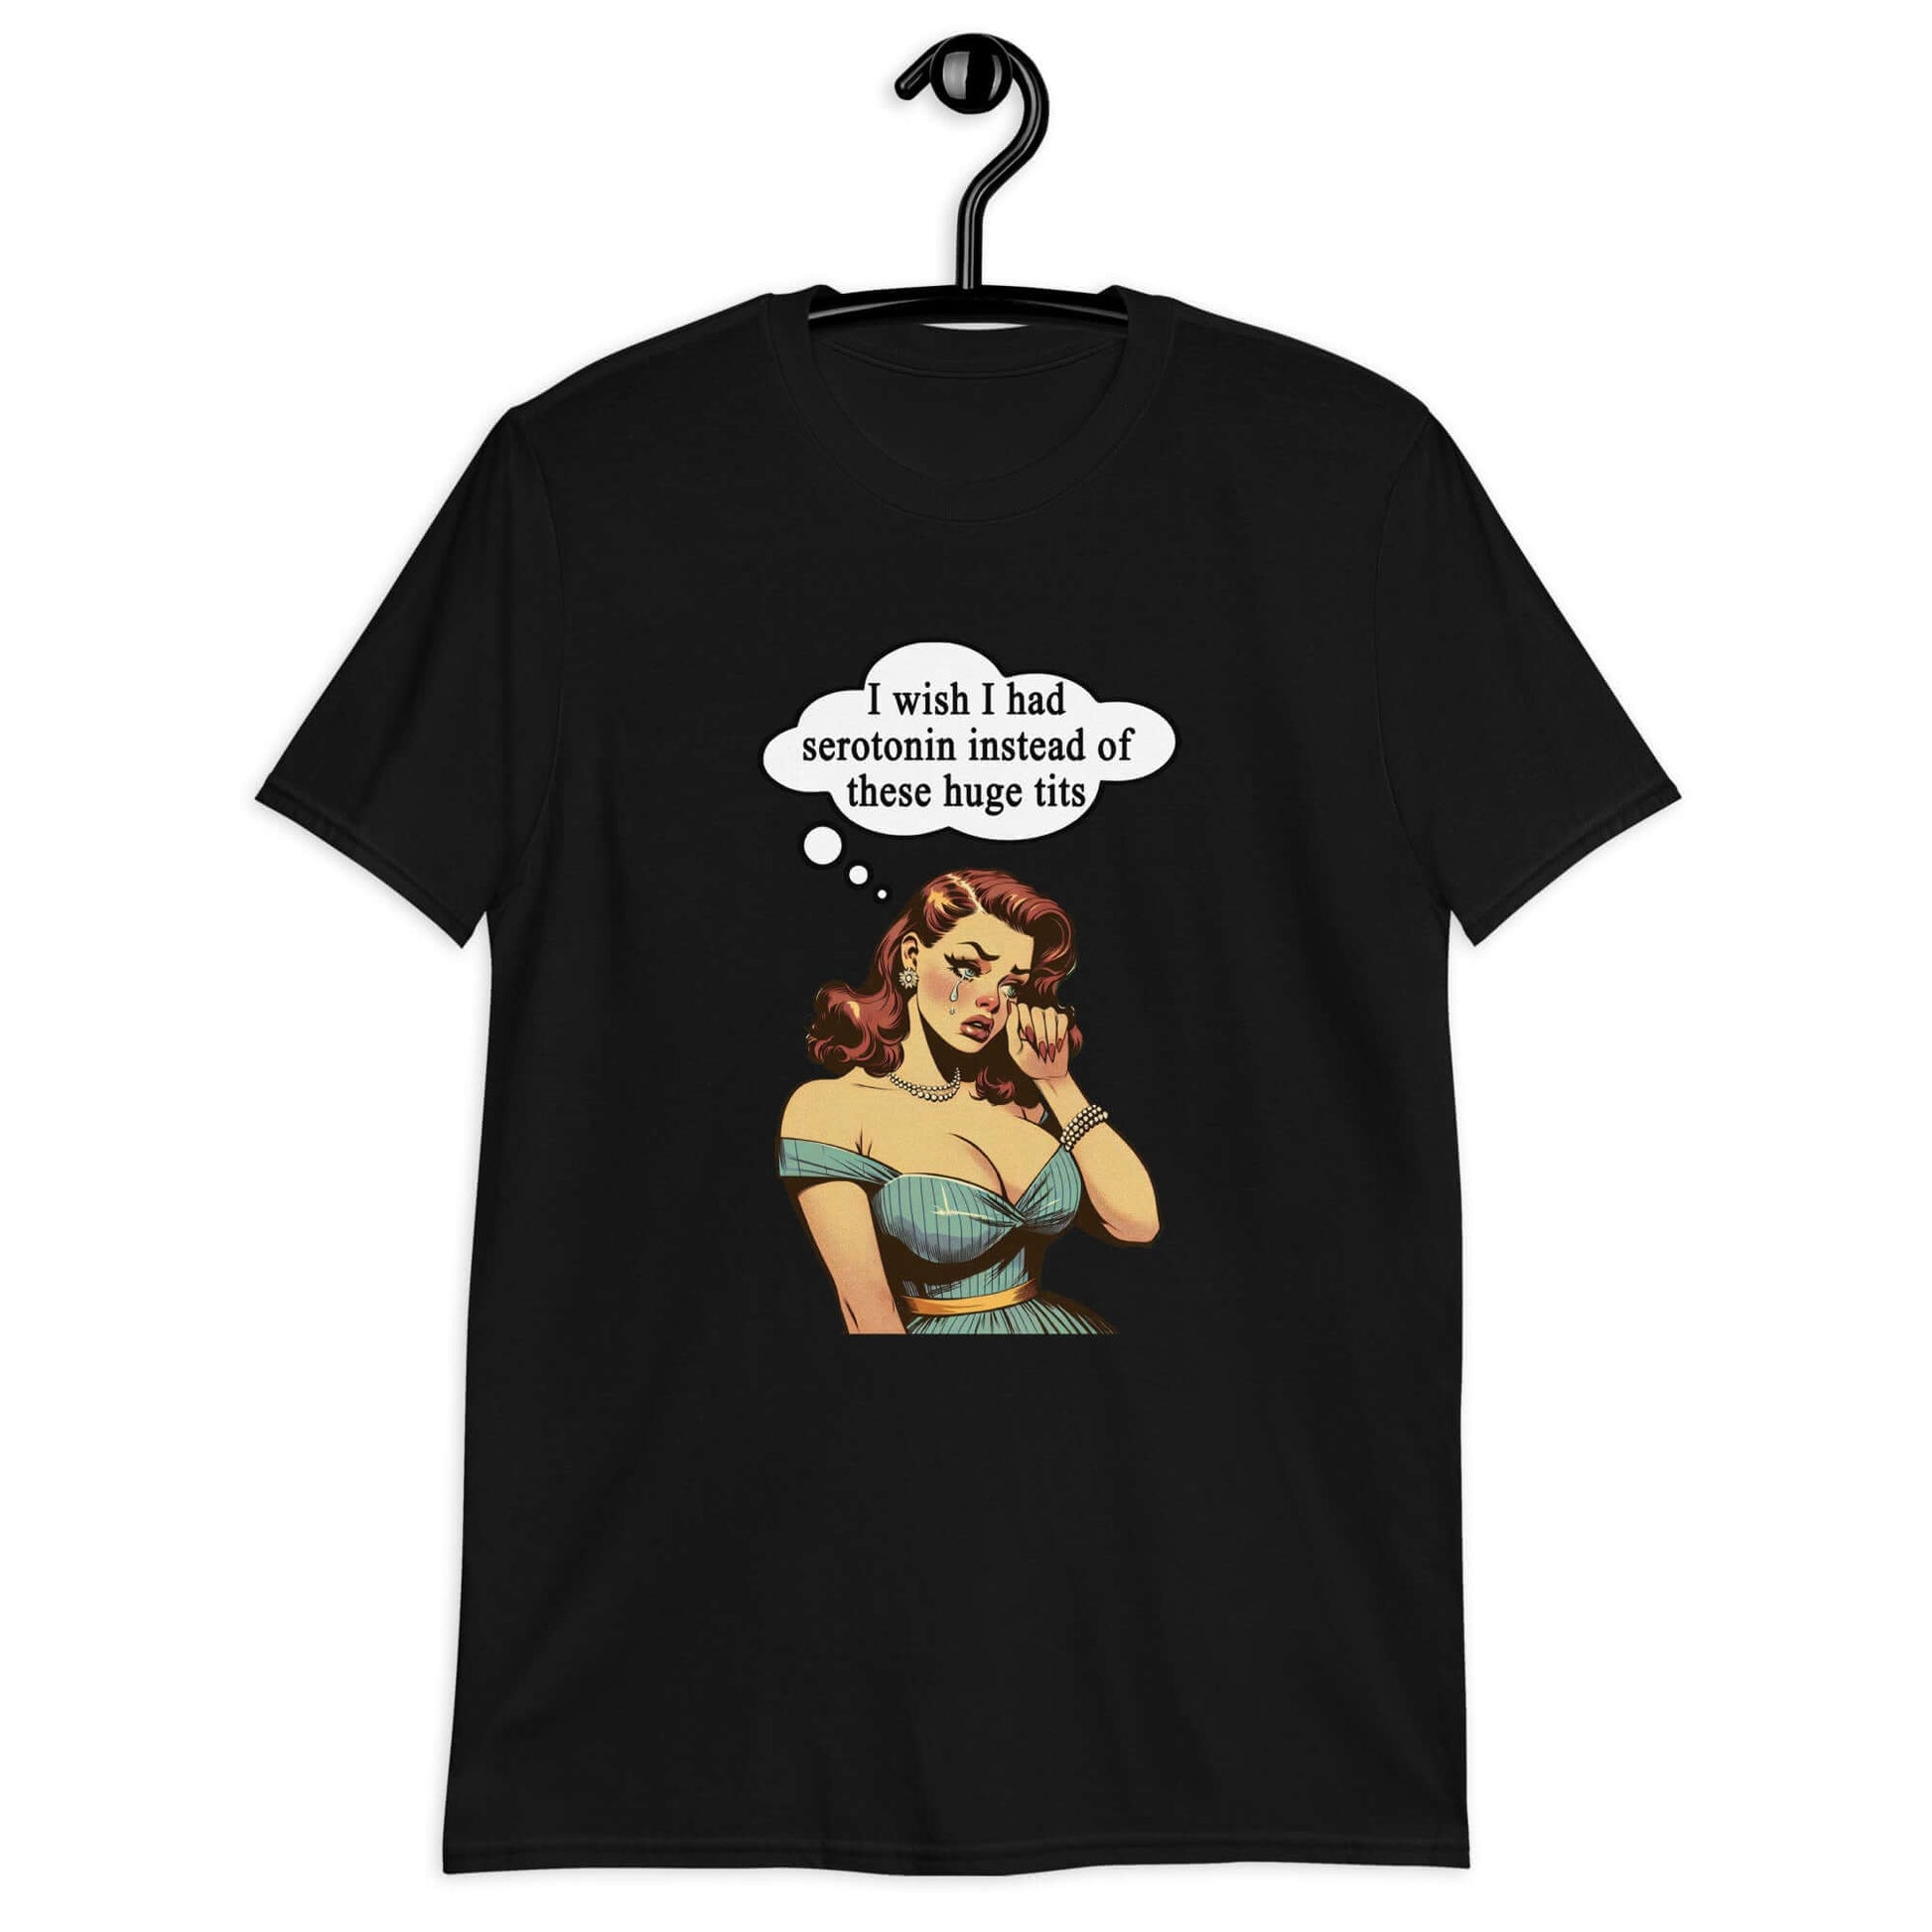 Black t-shirt with an image of a busty pin-up lady with thought bubble that says I wish I had serotonin instead of these huge tits printed on the front.